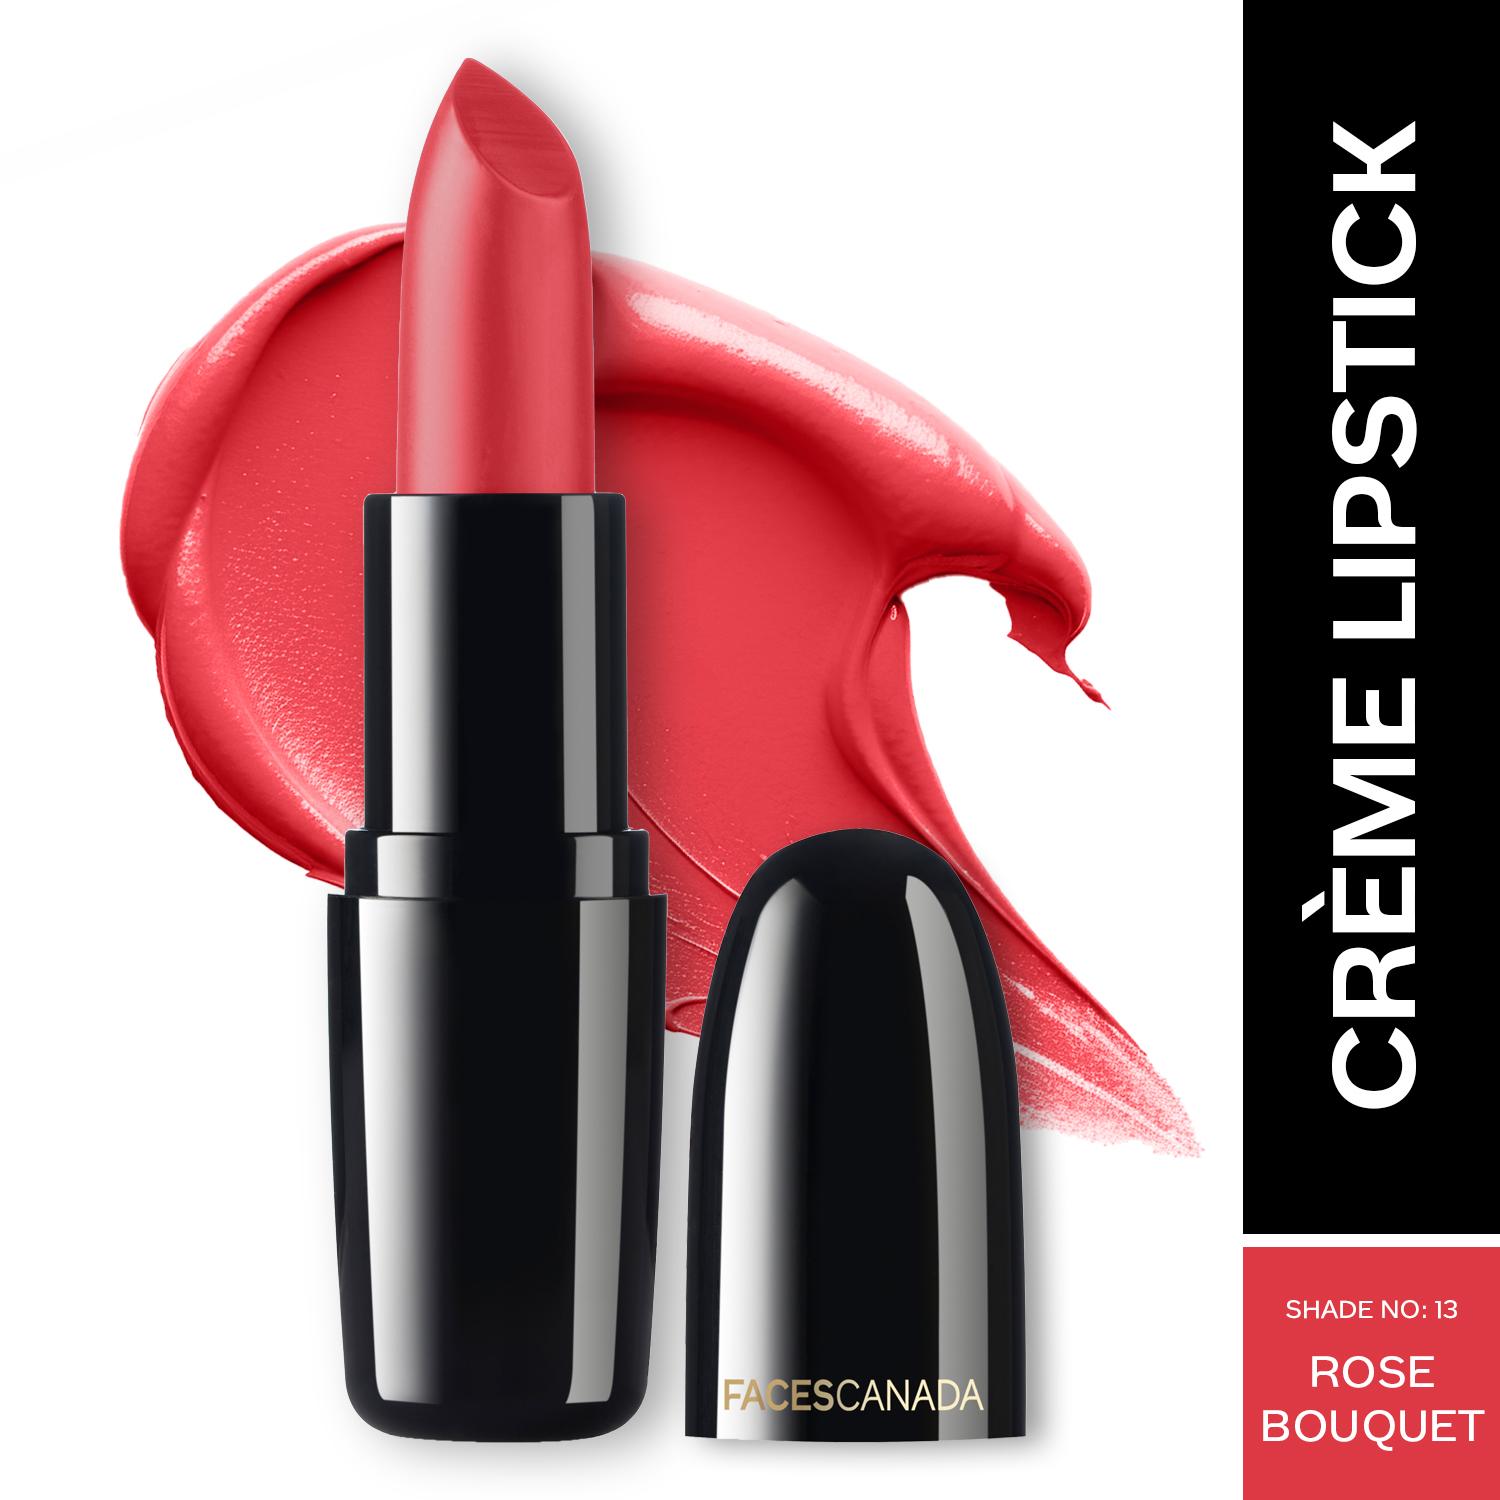 Faces Canada | Faces Canada Weightless Creme Finish Lipstick, Creamy Finish, Hydrated Lips - Rose Bouquet 13 (4 g)